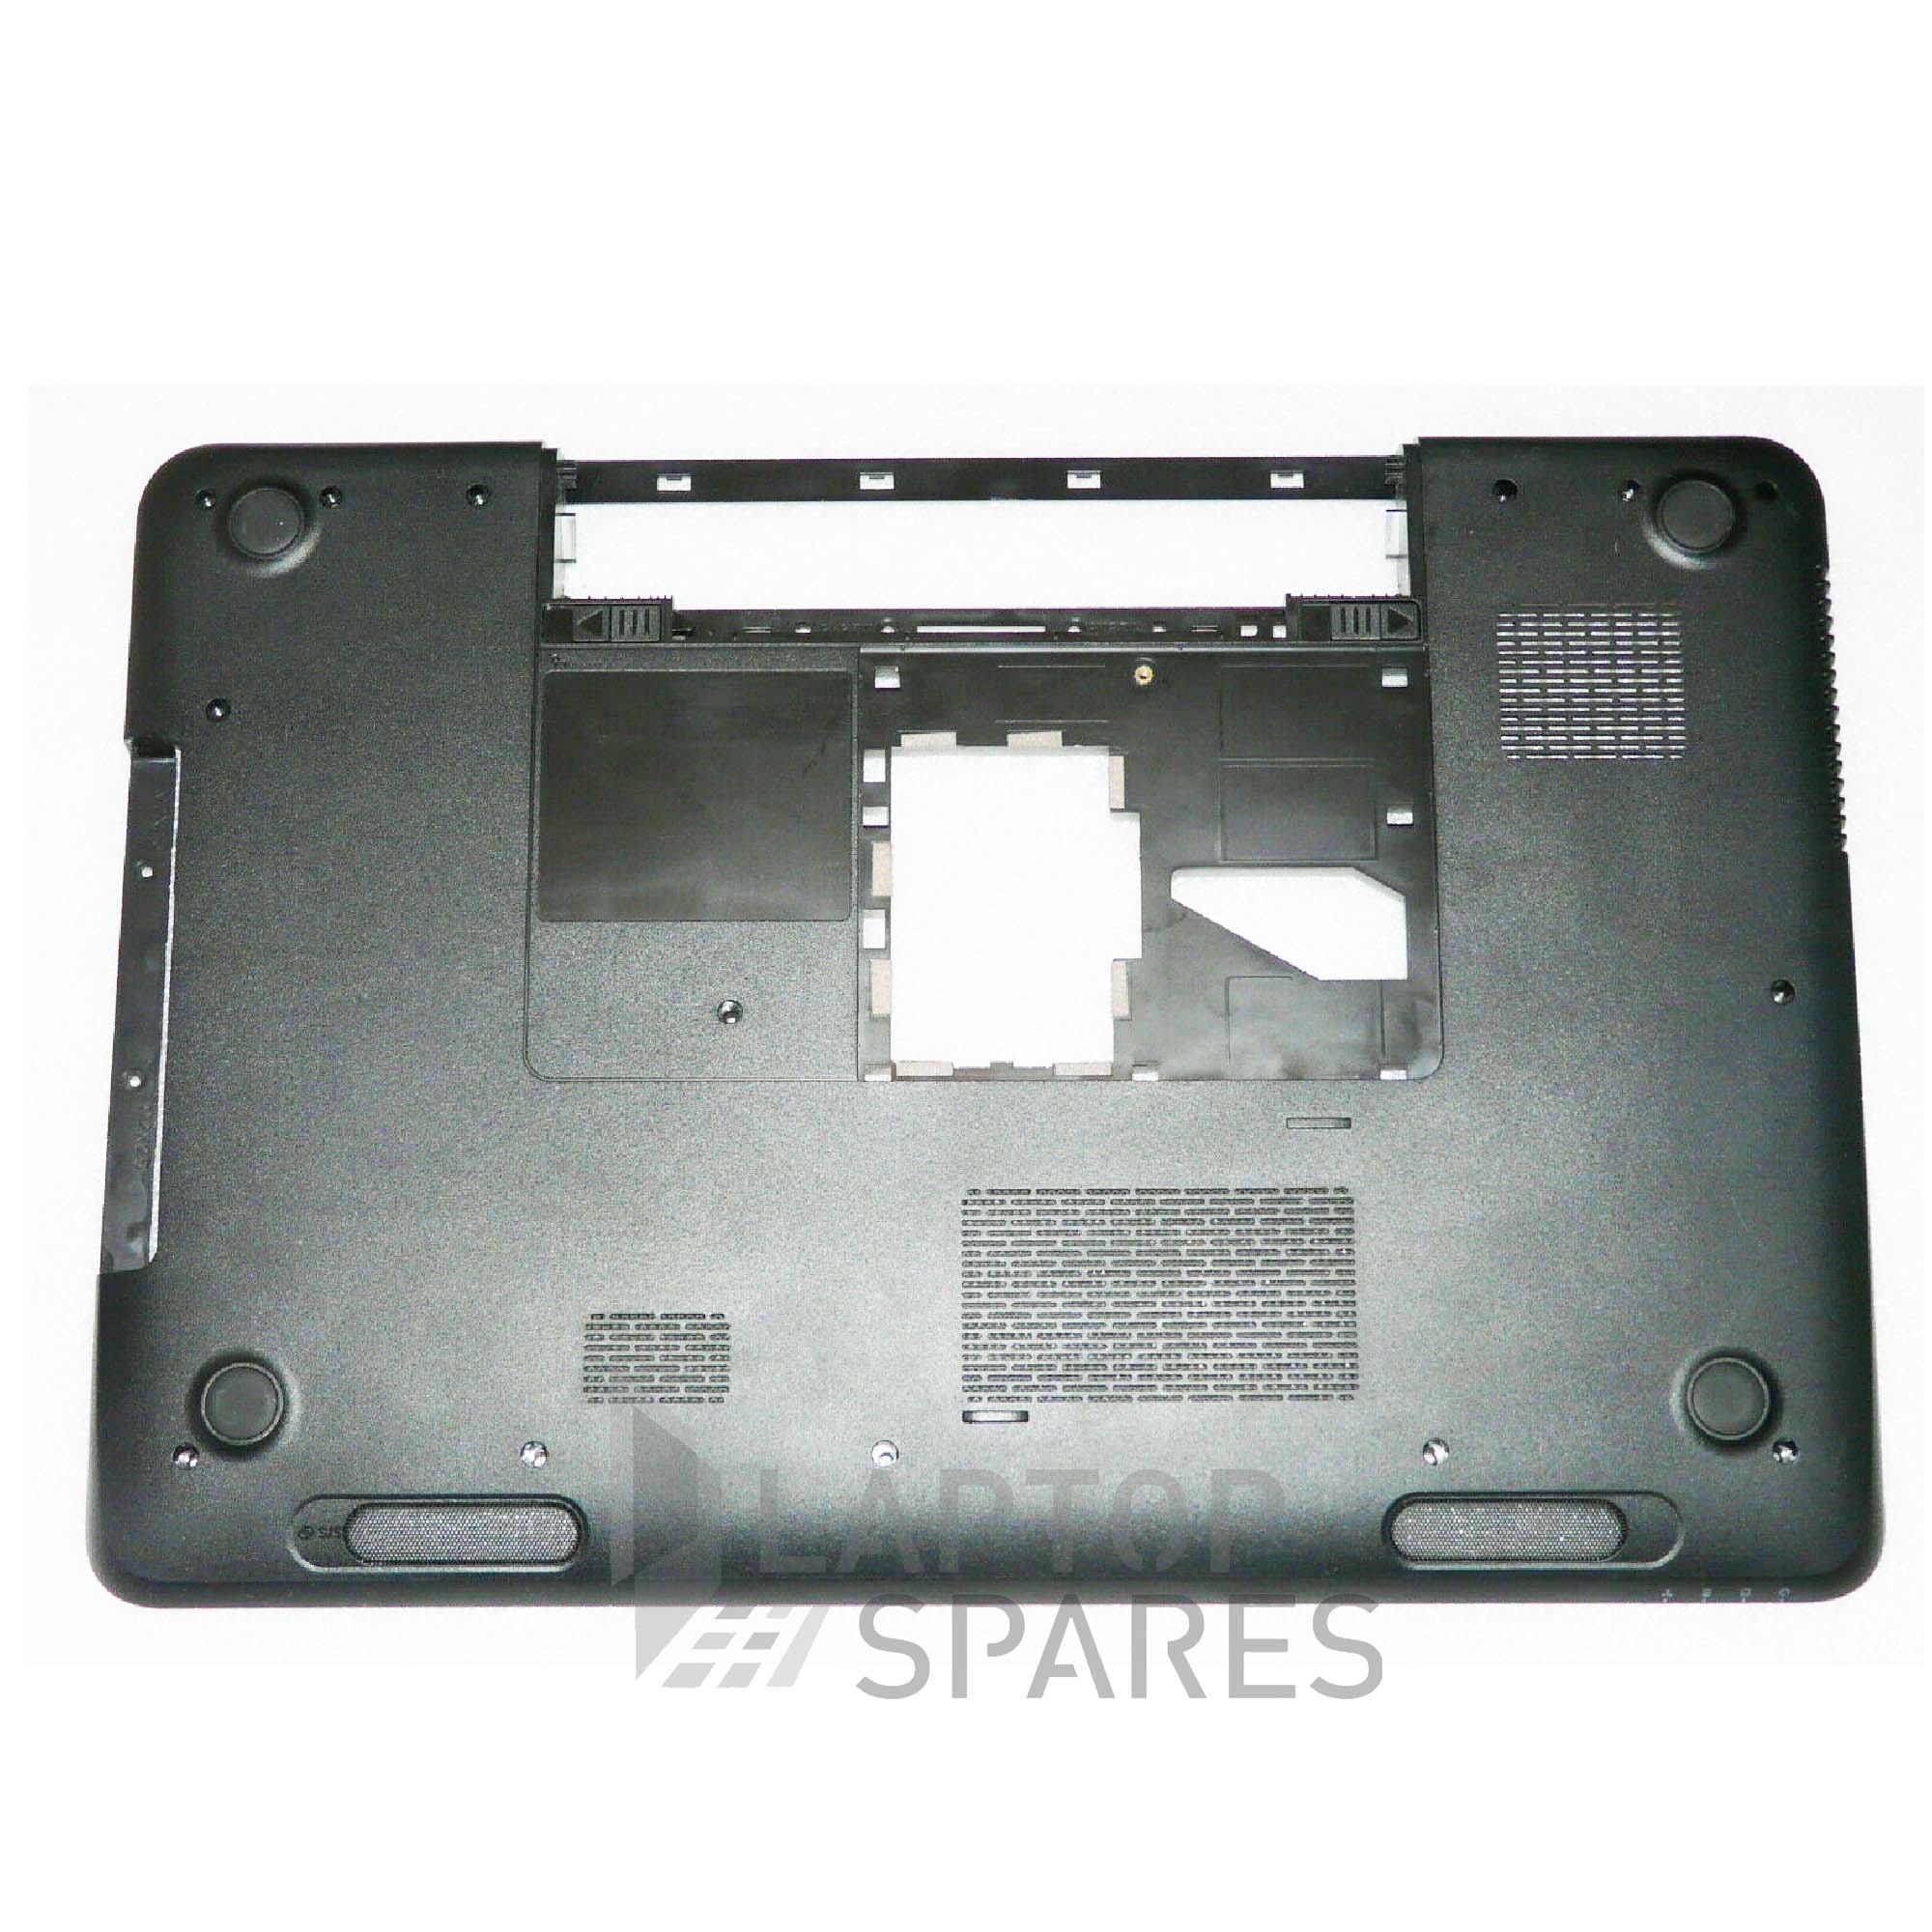 Dell Inspiron 17r N7110 Base Frame Bottom Case Price In Pakistan Laptop Spares